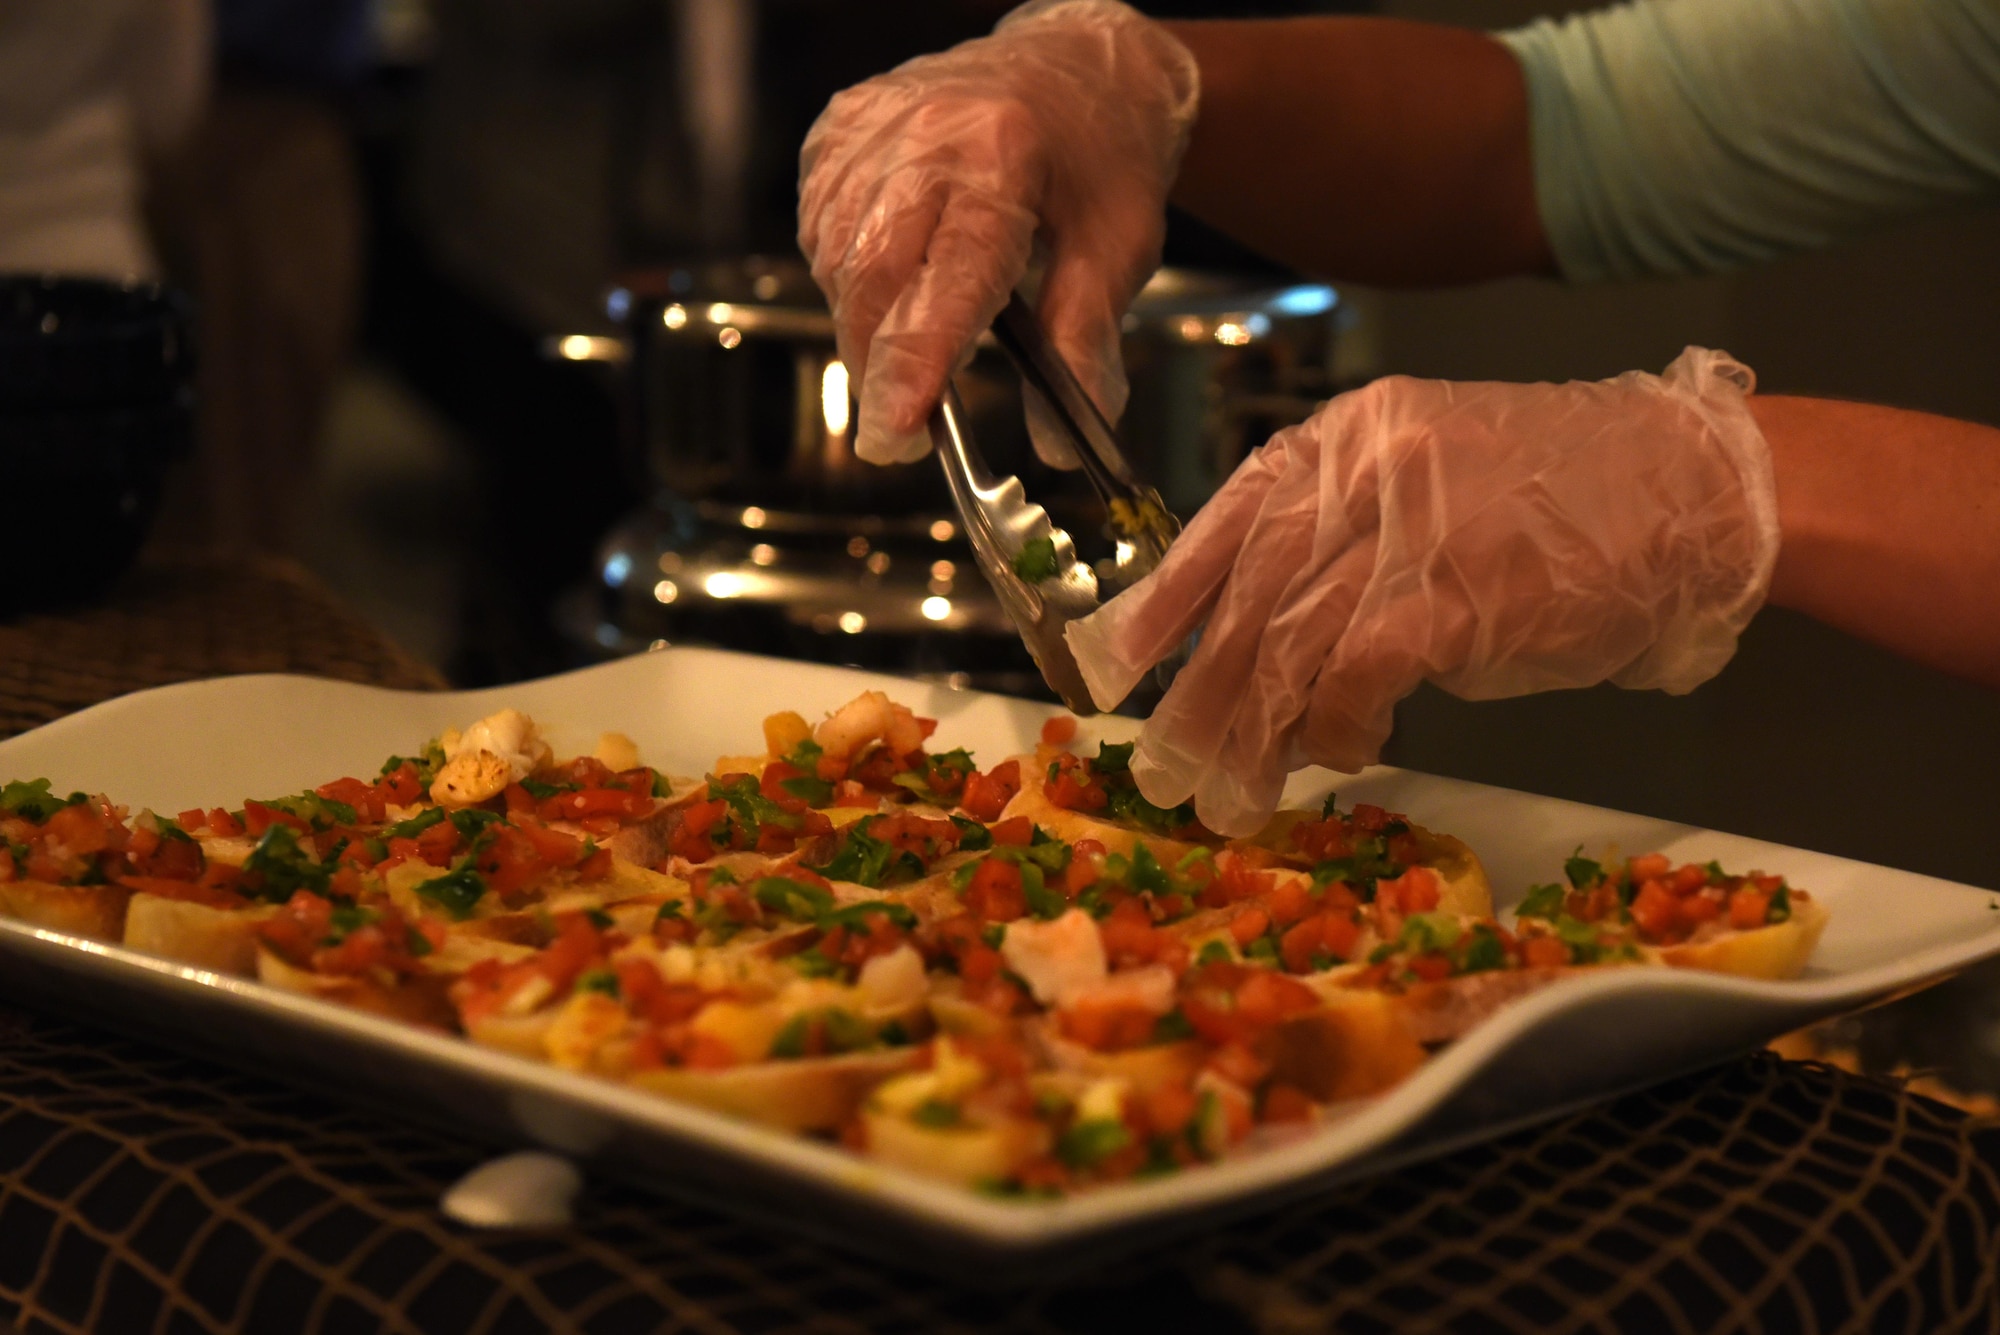 An employee prepares a dish for the food tasting event hosted by the 19th Force Support Squadron Oct. 3, 2016, at Hangar 1080 on Little Rock Air Force Base, Ark. The event provided an opportunity for attendees to sample new food items available at base dining facilities under the 19th FSS non-appropriated funds operation. (U.S. Air Force photo by Airman Kevin Sommer Giron)